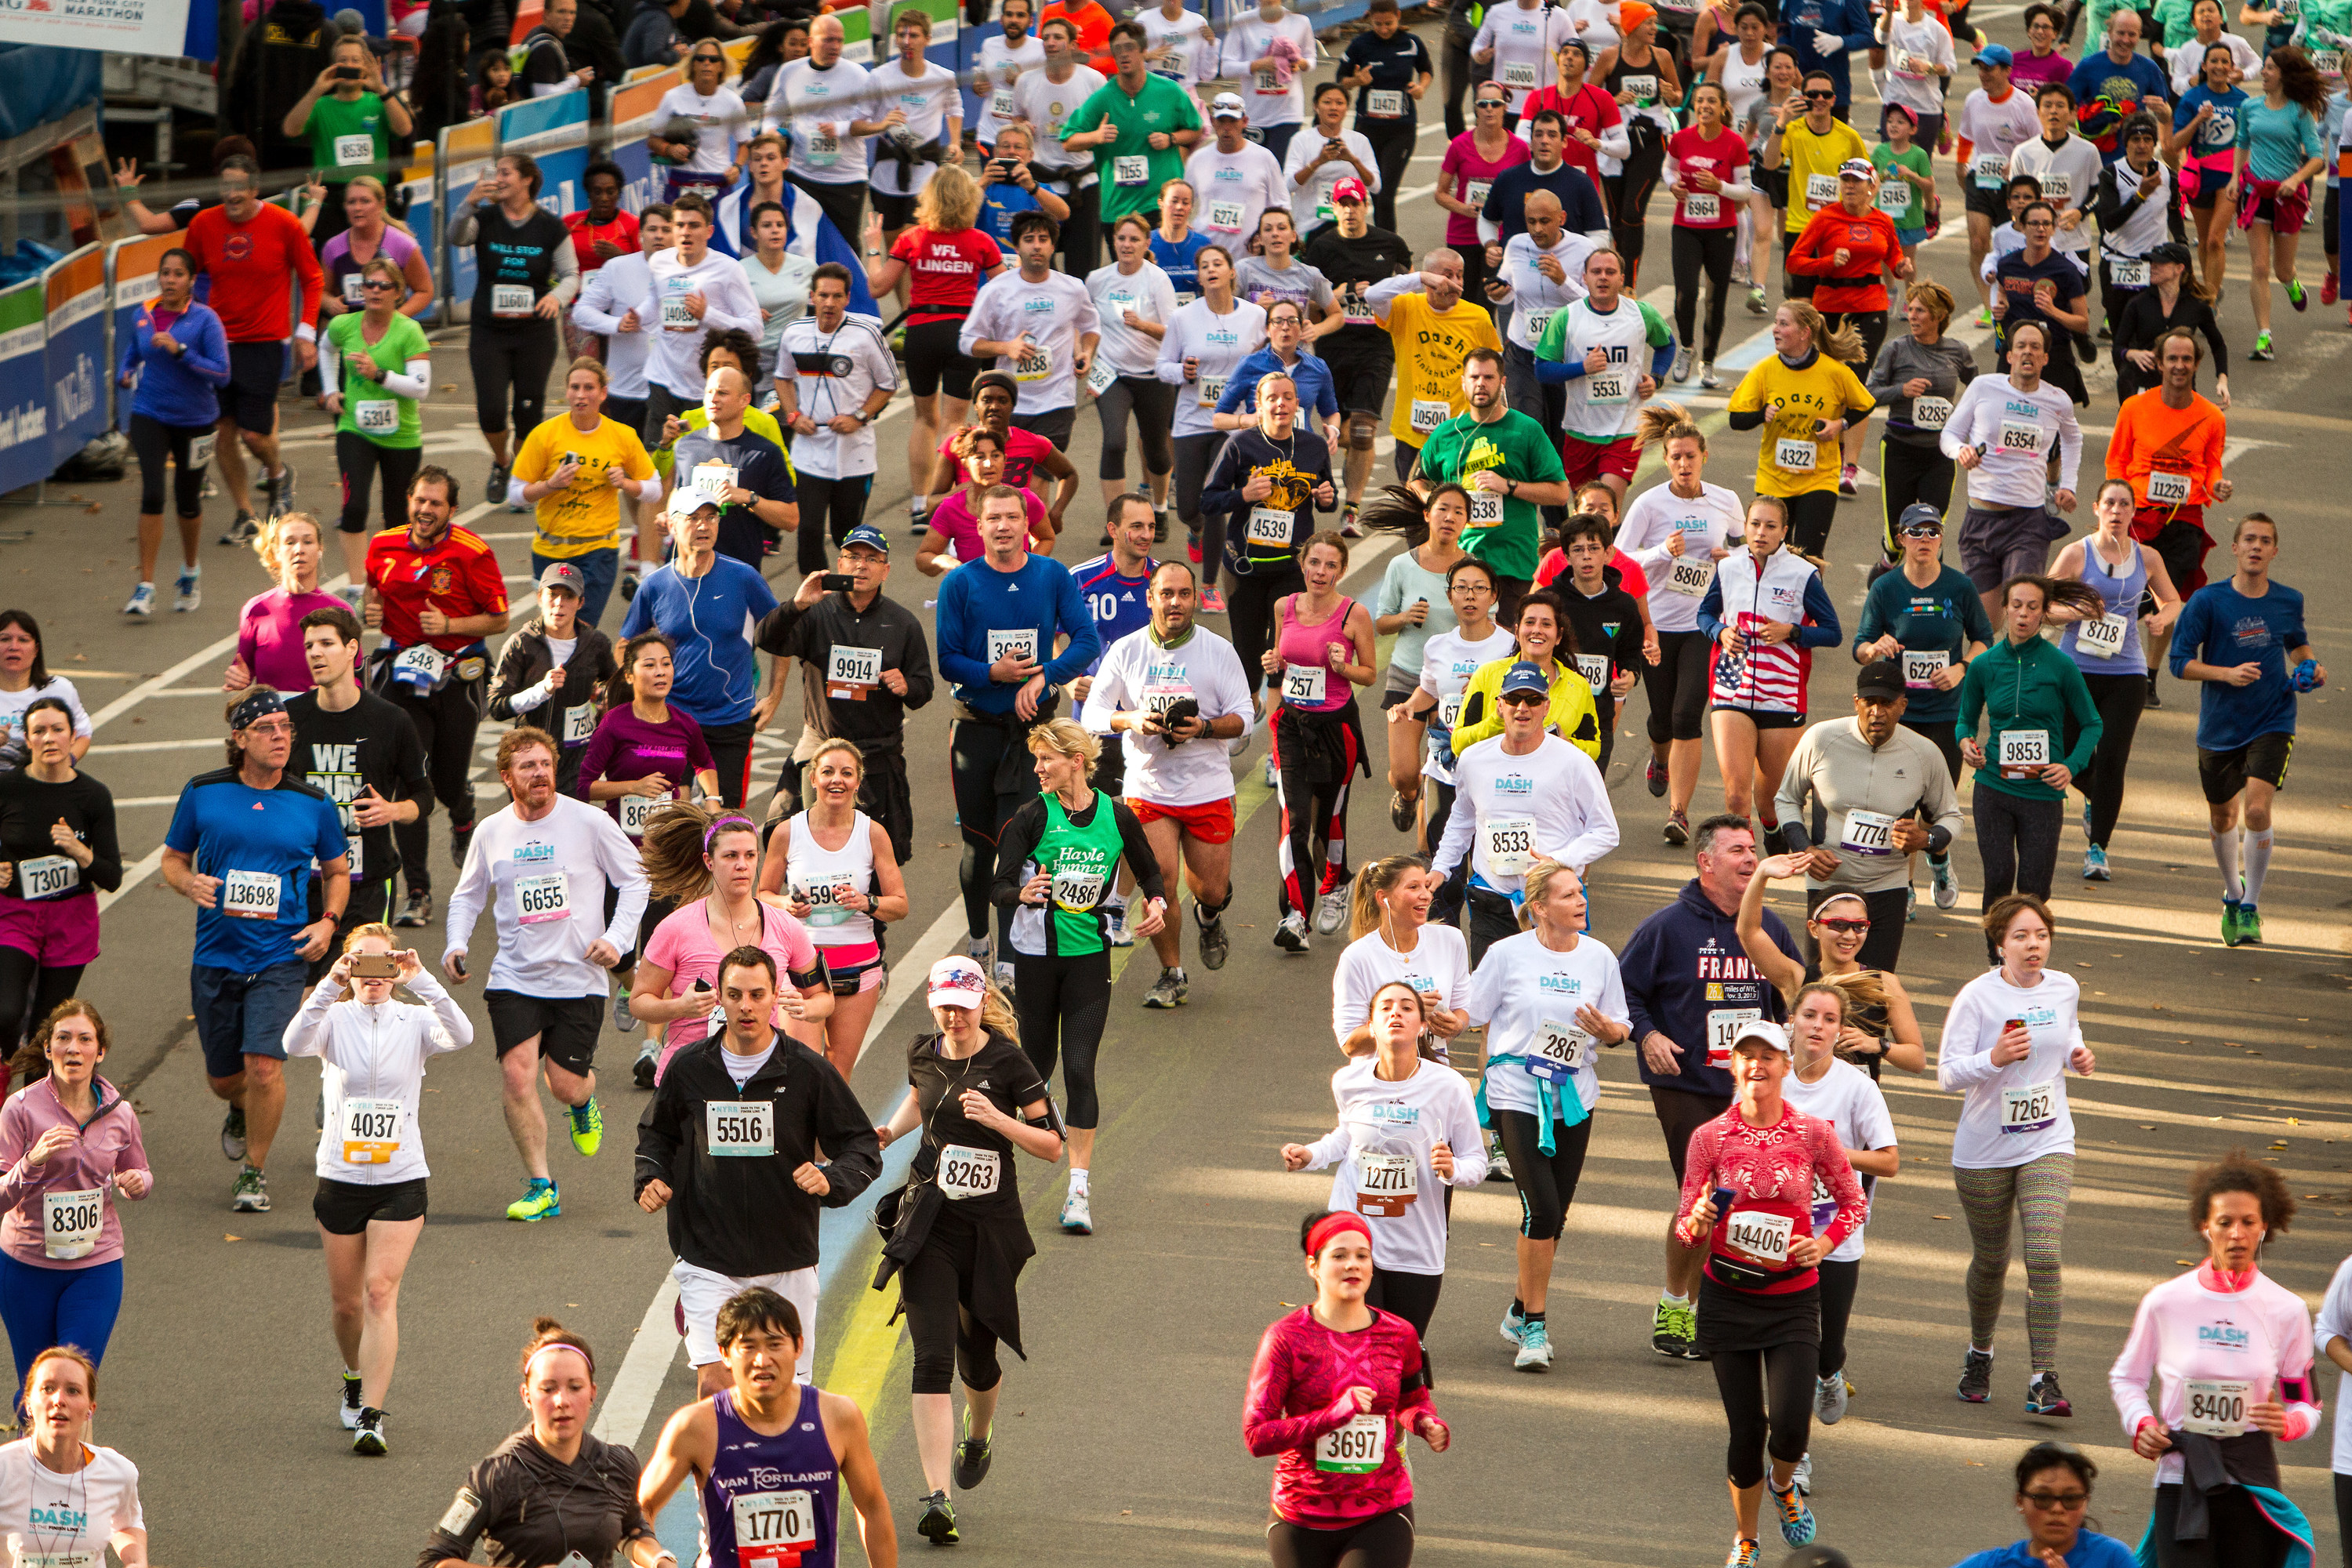 A large crowd runs in a 5K race in New York